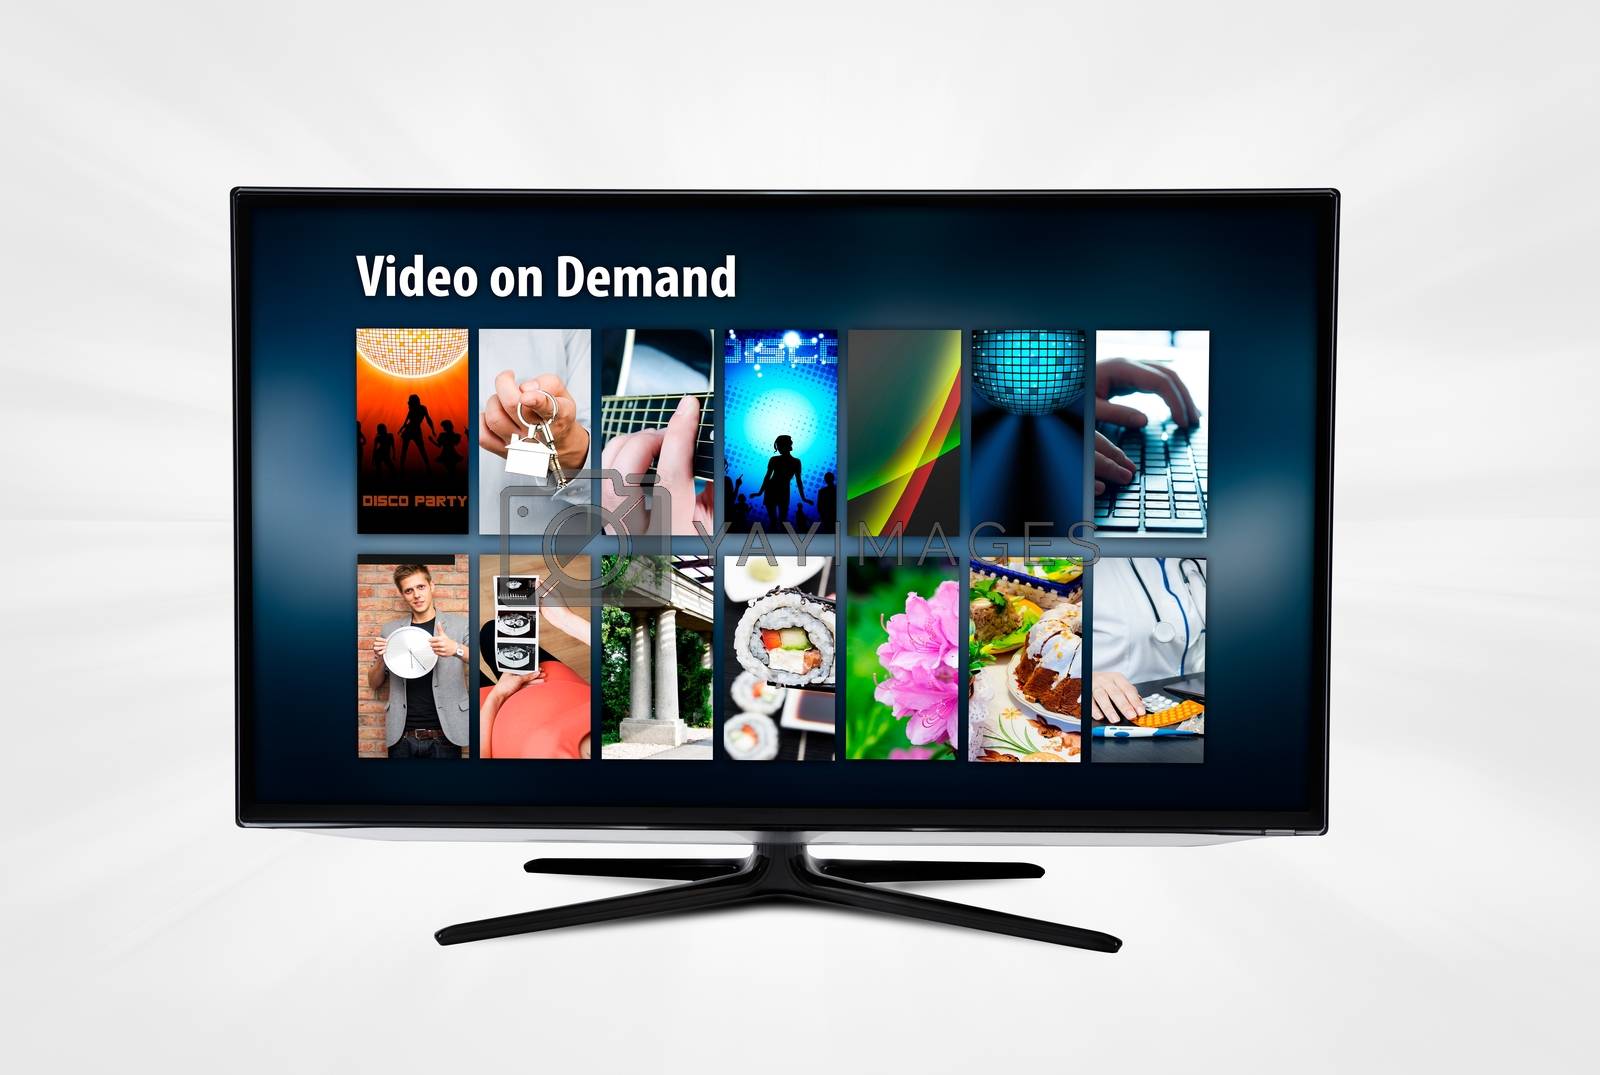 Royalty free image of Video on demand VOD service on smart TV by simpson33